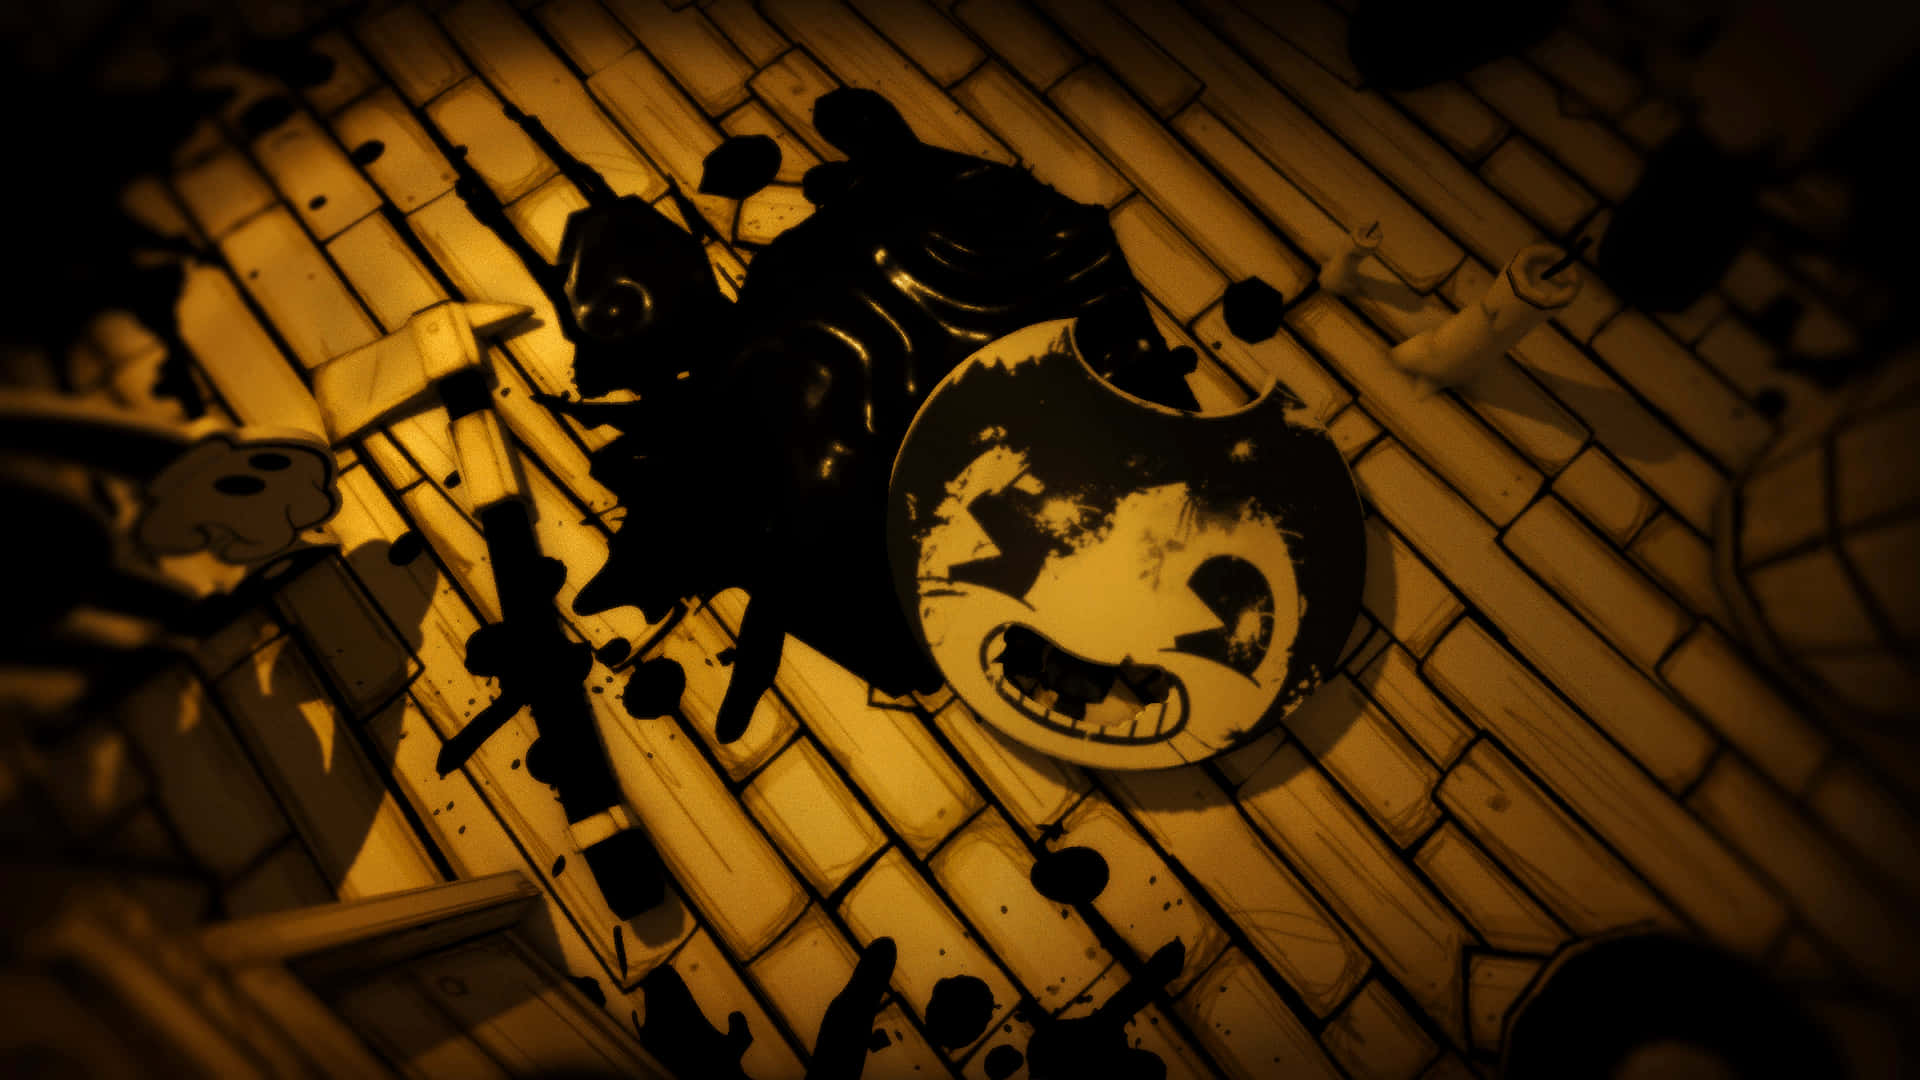  TomTheRoyalFox  on Twitter Bendy And The Ink Machine Wallpaper for  PC Game by themeatly httpstconEx8lnJ5y8  Twitter